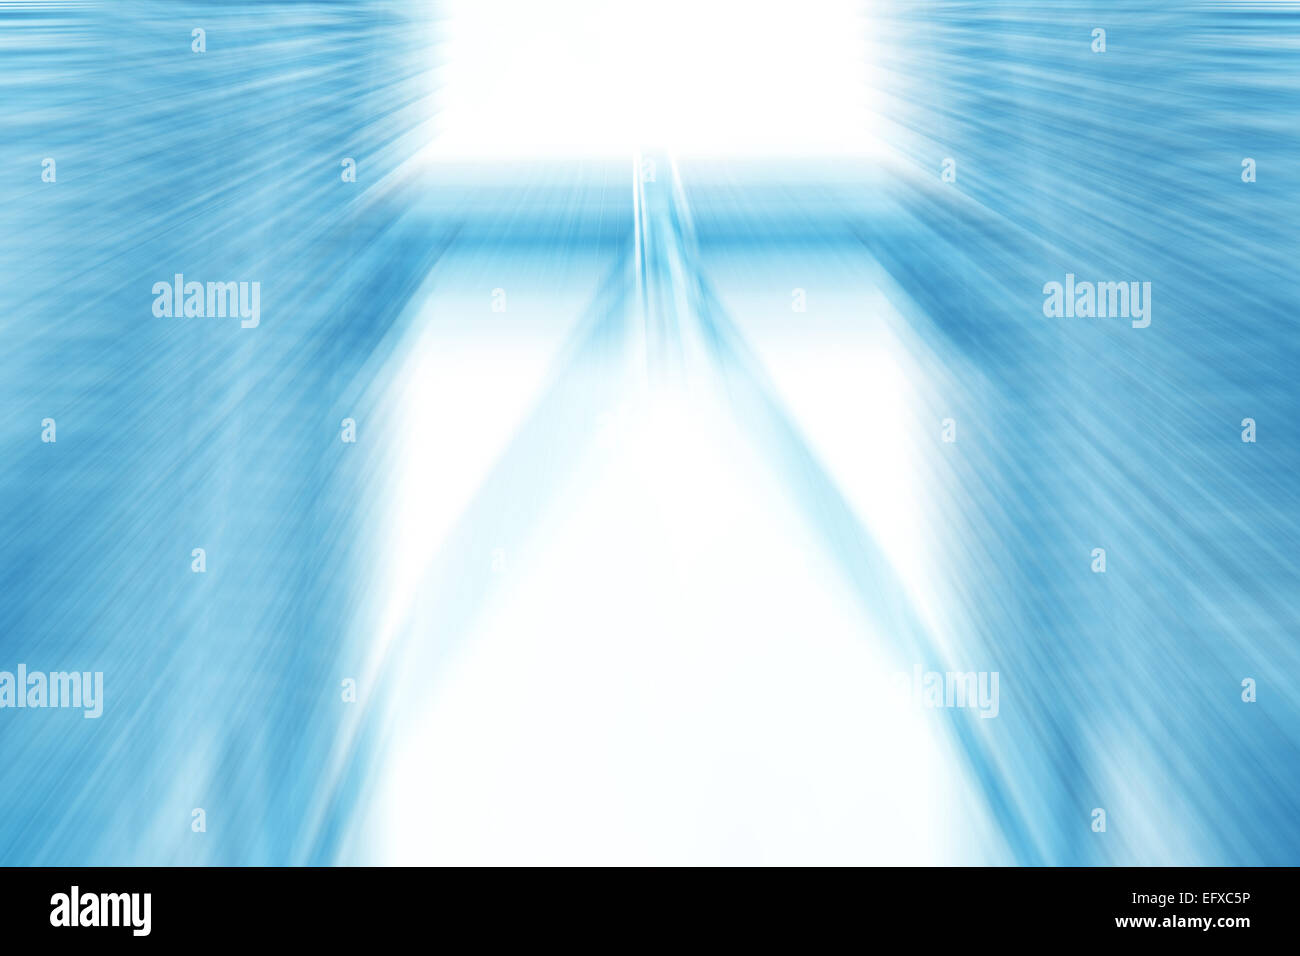 Abstract motion blurred high tech background. Stock Photo